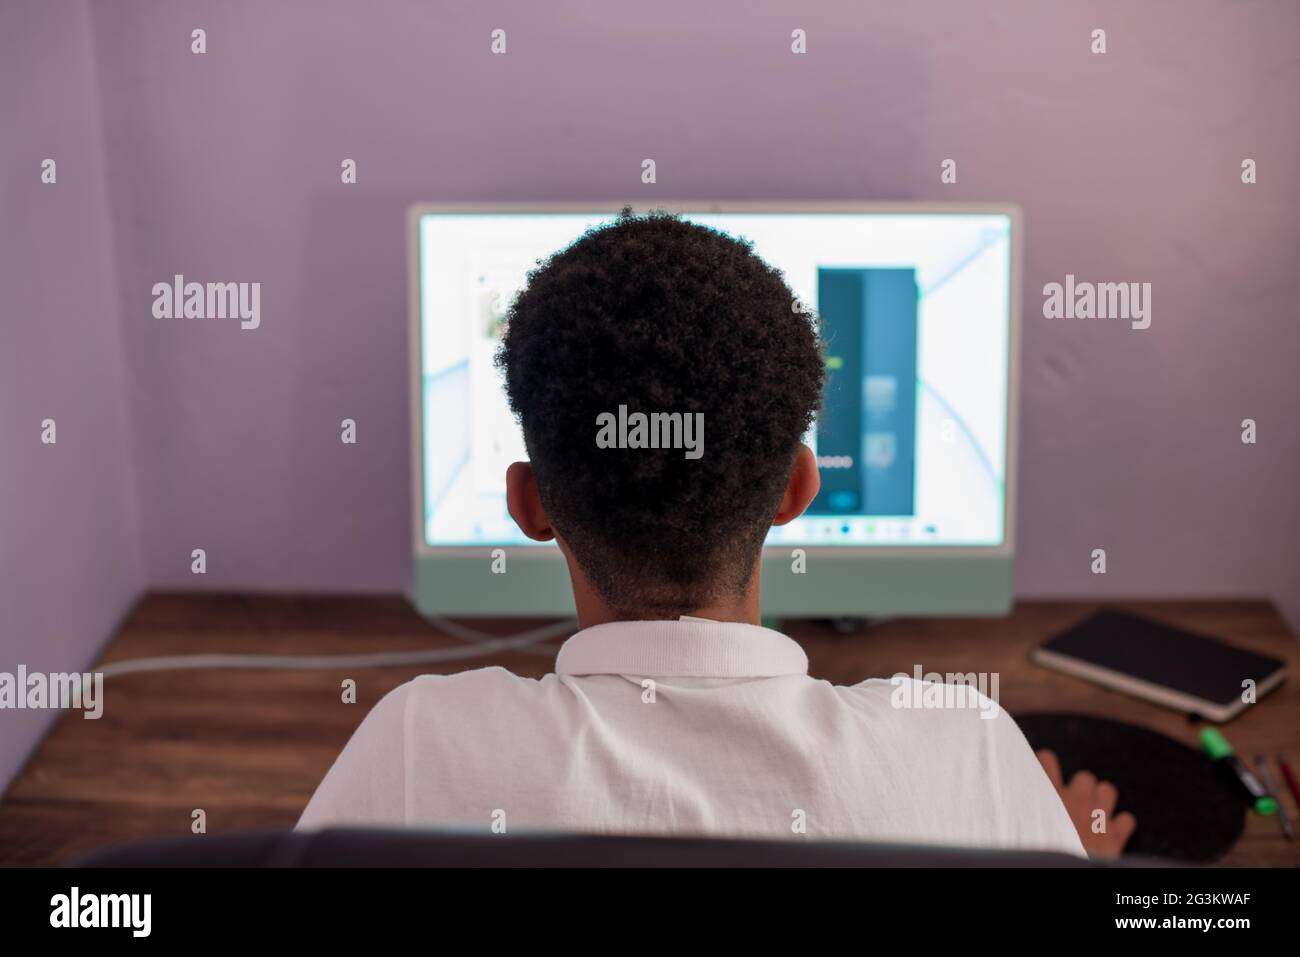 Young boy using computer at home Stock Photo